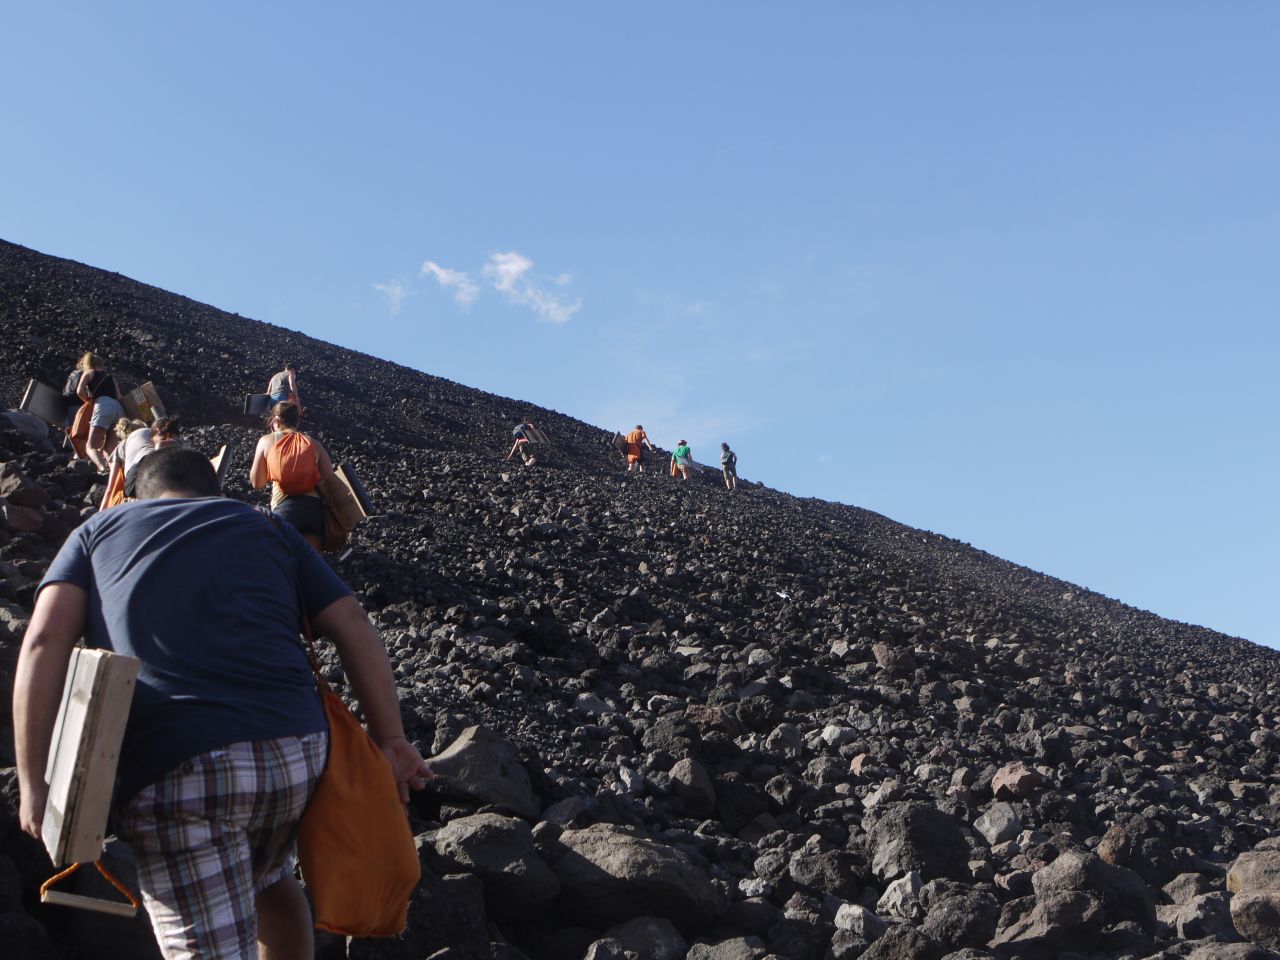 The hike to the top of Cerro Negro takes about an hour.